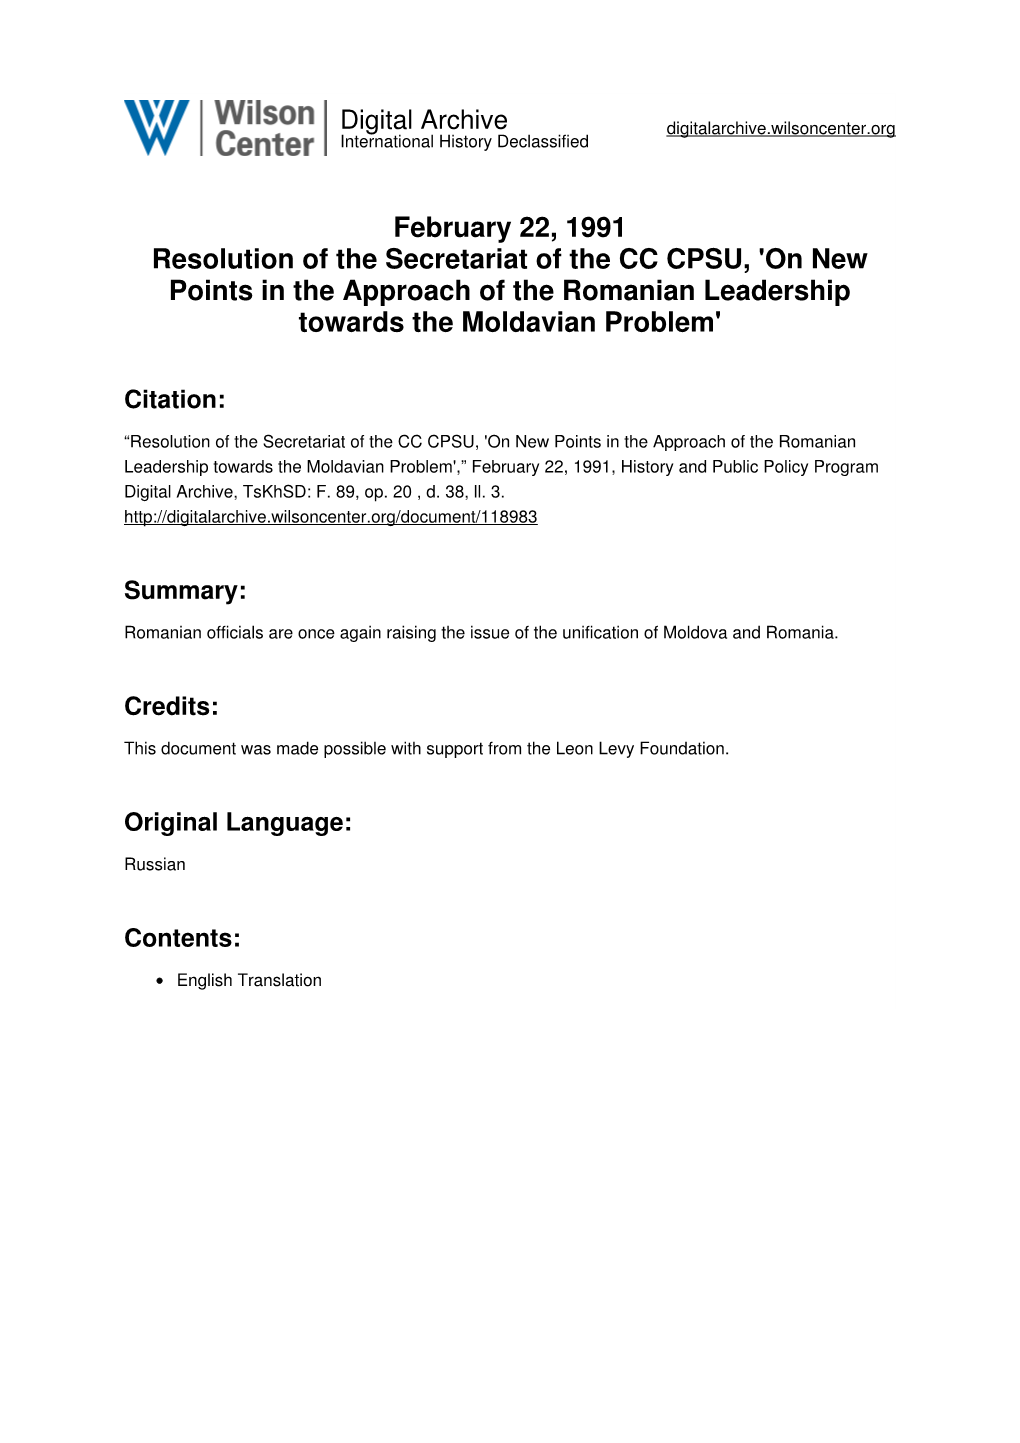 February 22, 1991 Resolution of the Secretariat of the CC CPSU, 'On New Points in the Approach of the Romanian Leadership Towards the Moldavian Problem'